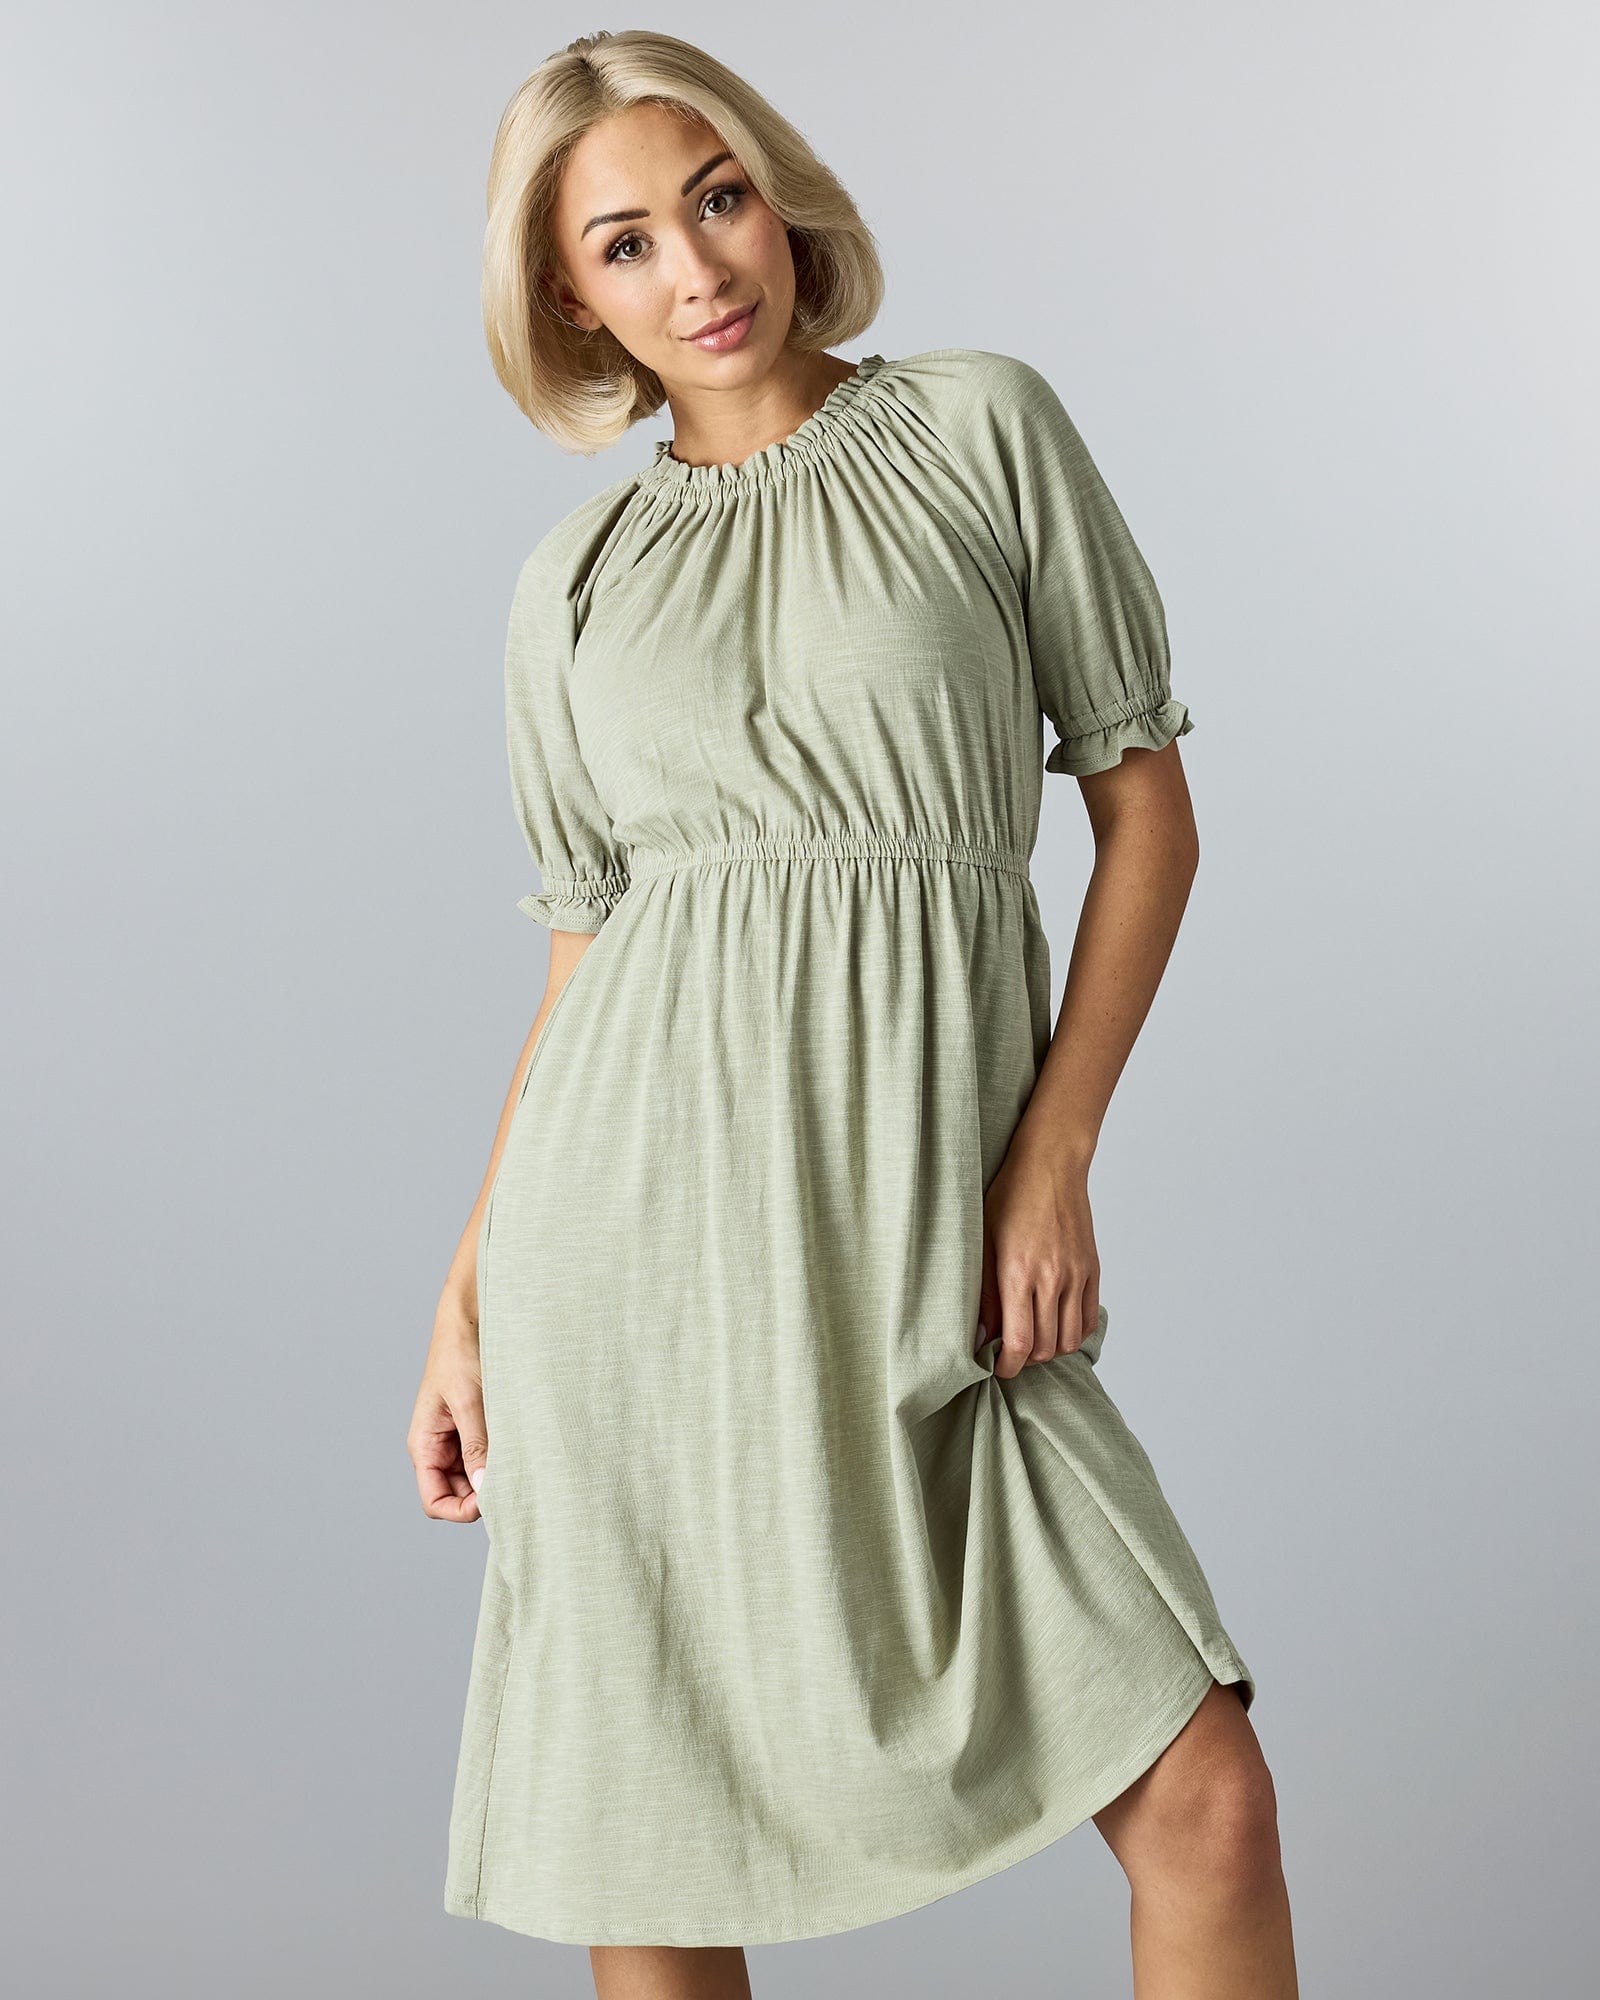 Woman in a green, knee-length, short sleeve dress with a high neckline and ruffles at neck and arms.